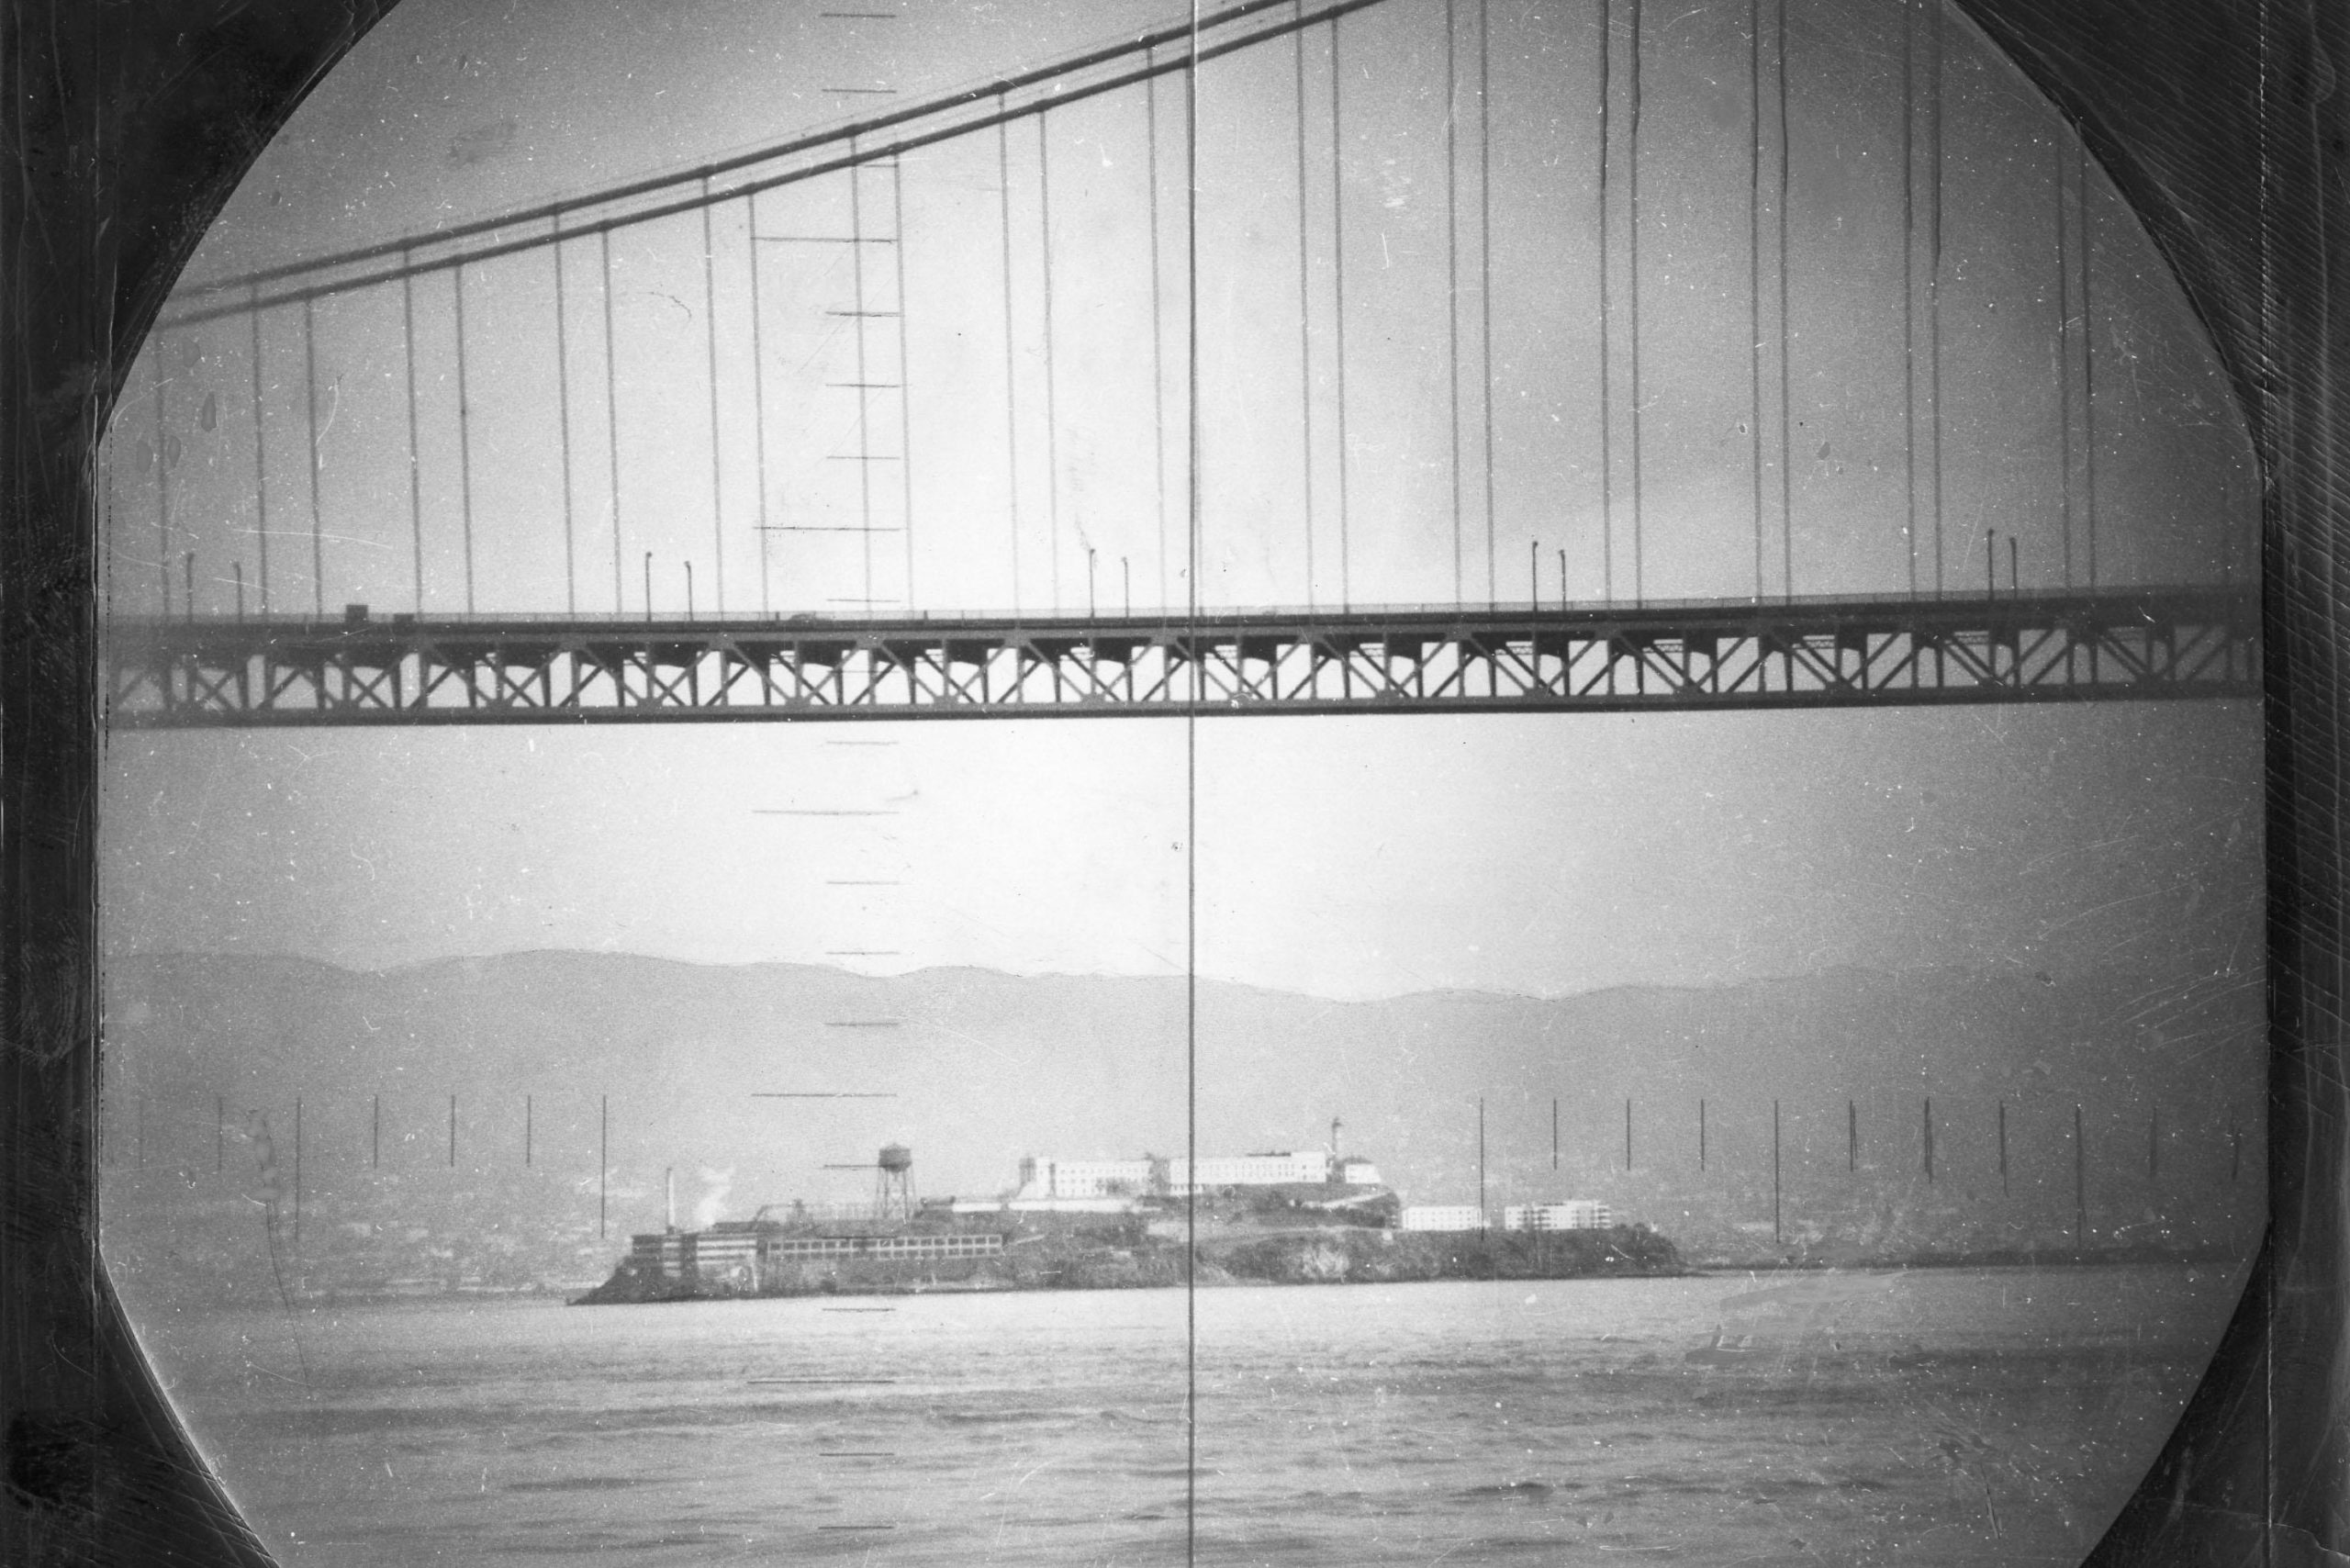 Through A Submarine Periscope Is The Best Way To View San Francisco